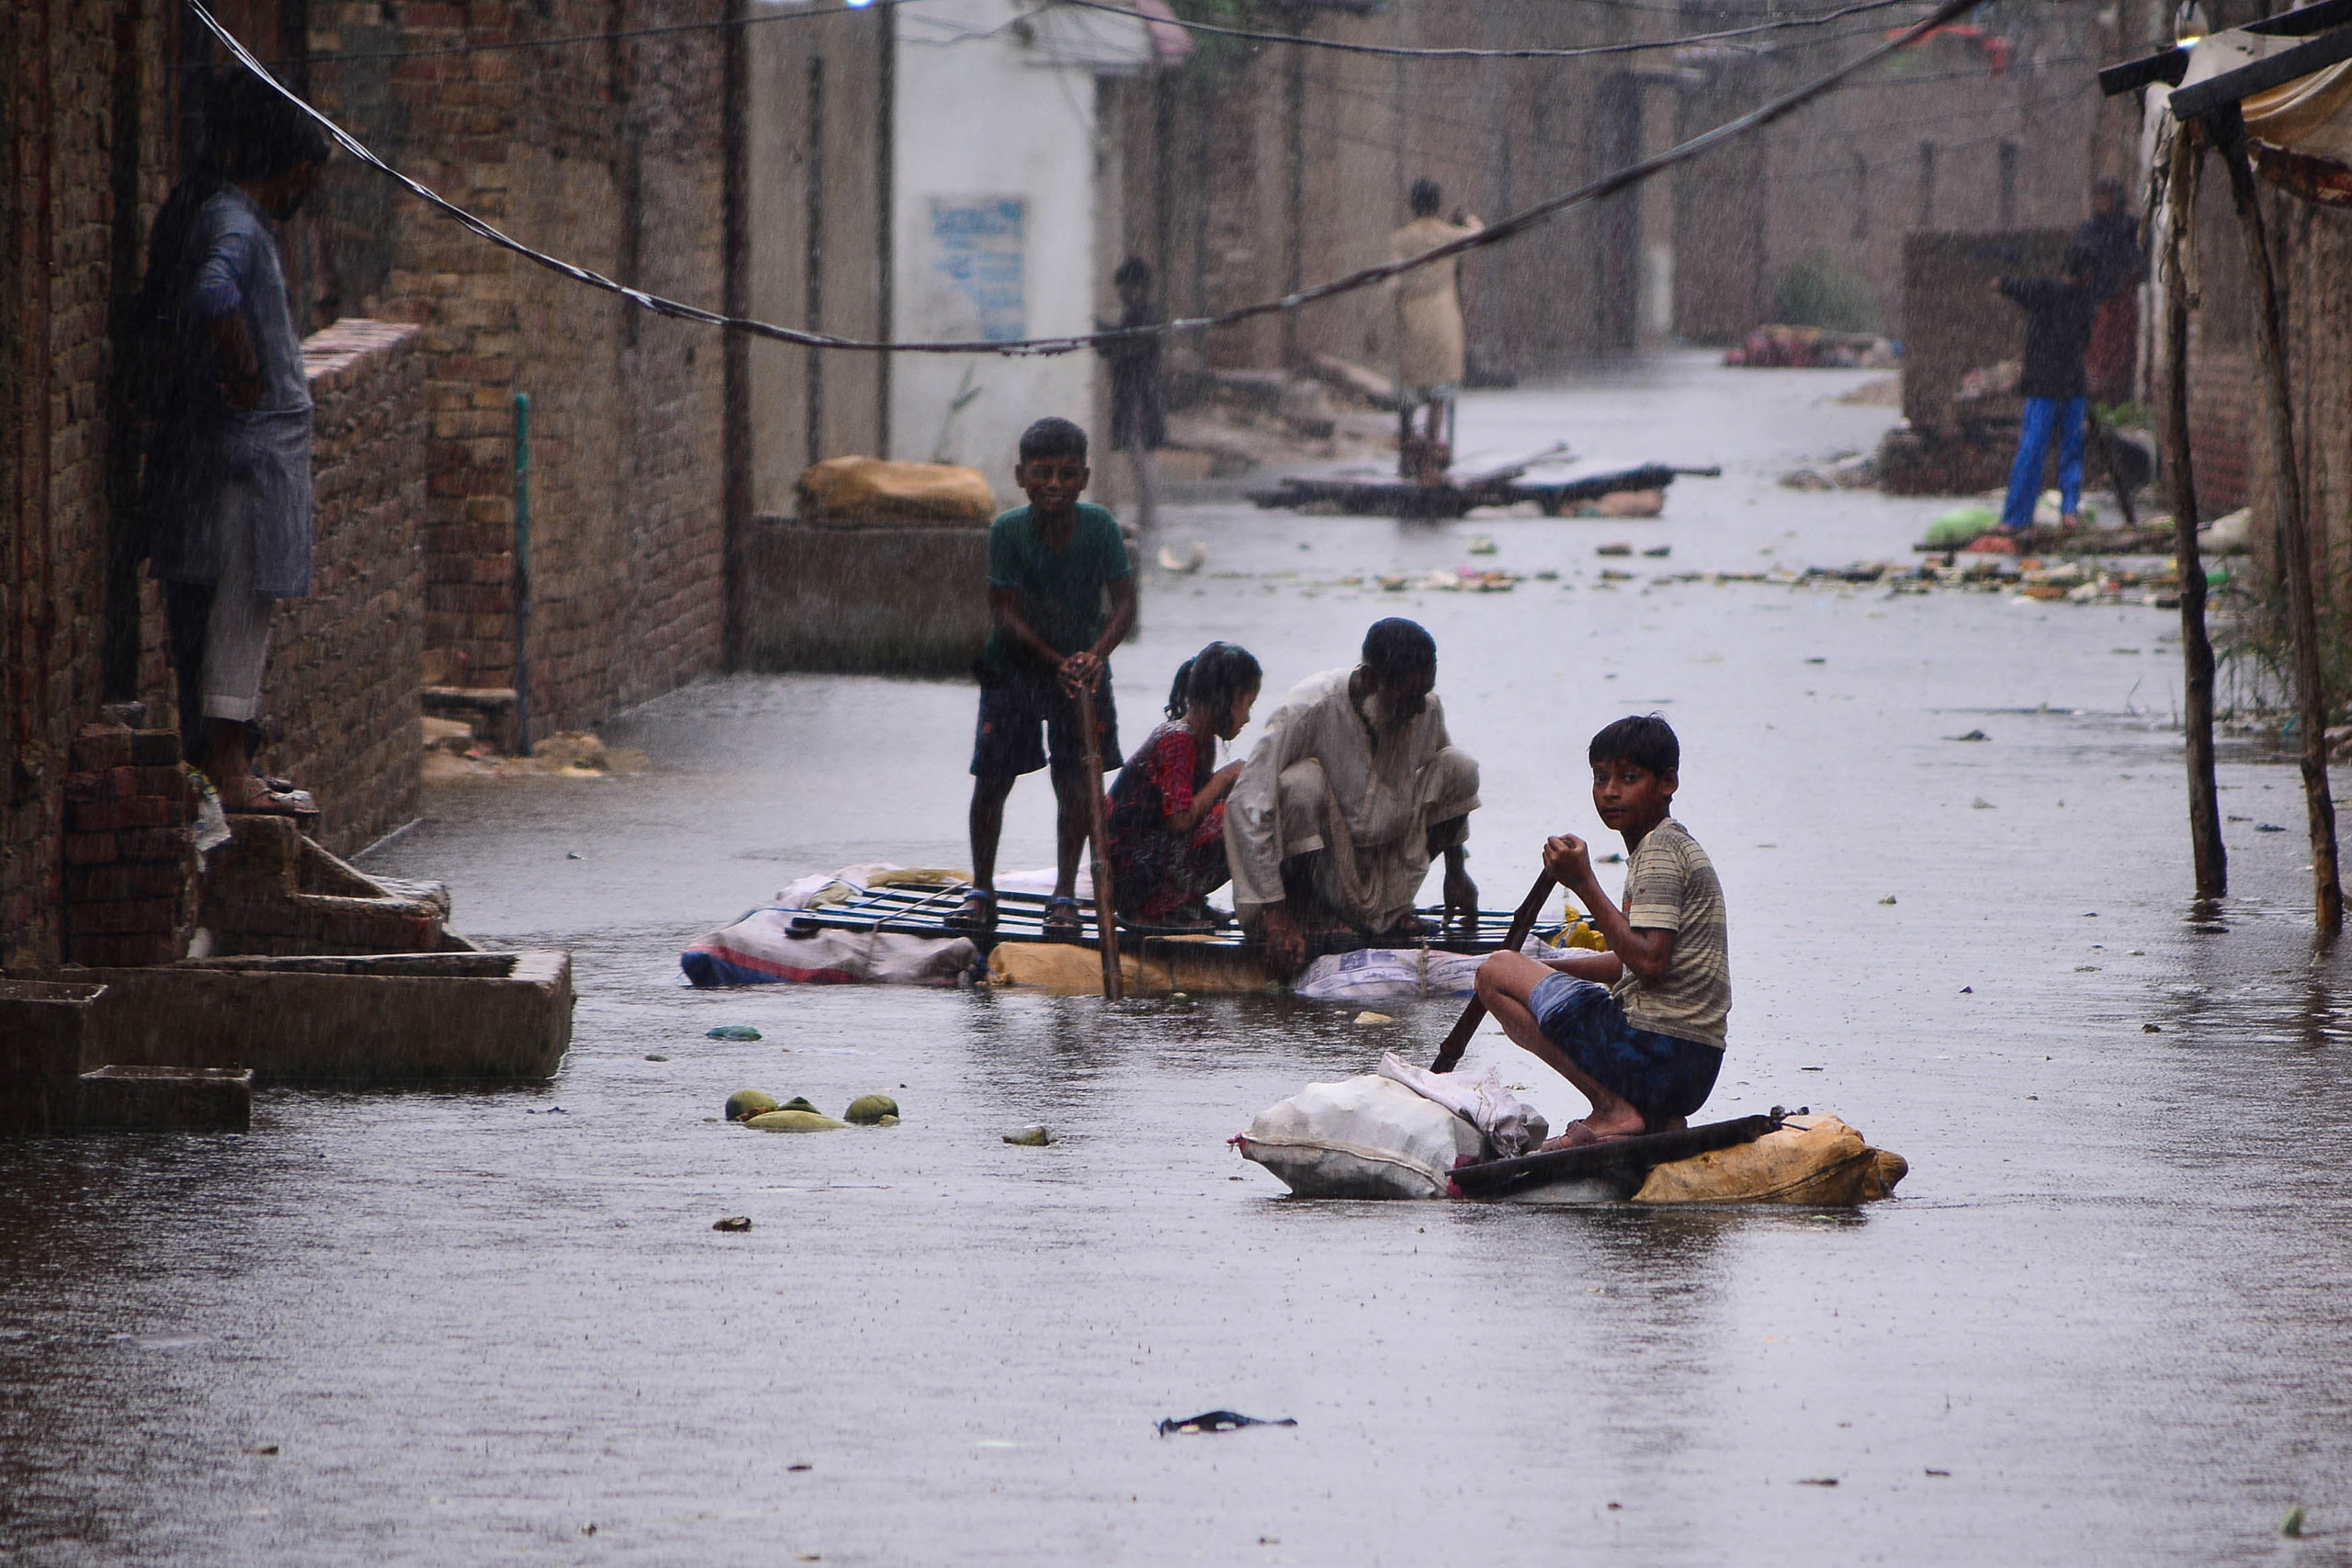 Children use rafts to make their way along a waterlogged street in a residential area after a heavy monsoon rainfall in Hyderabad on 24 August 2022. Record monsoon rains were causing a “catastrophe of epic scale”, Pakistan's Climate Change Minister said August 24, announcing an international appeal for help in dealing with floods that have killed more than 800 people since June 2022. Photo: Akram SHAHID / AFP